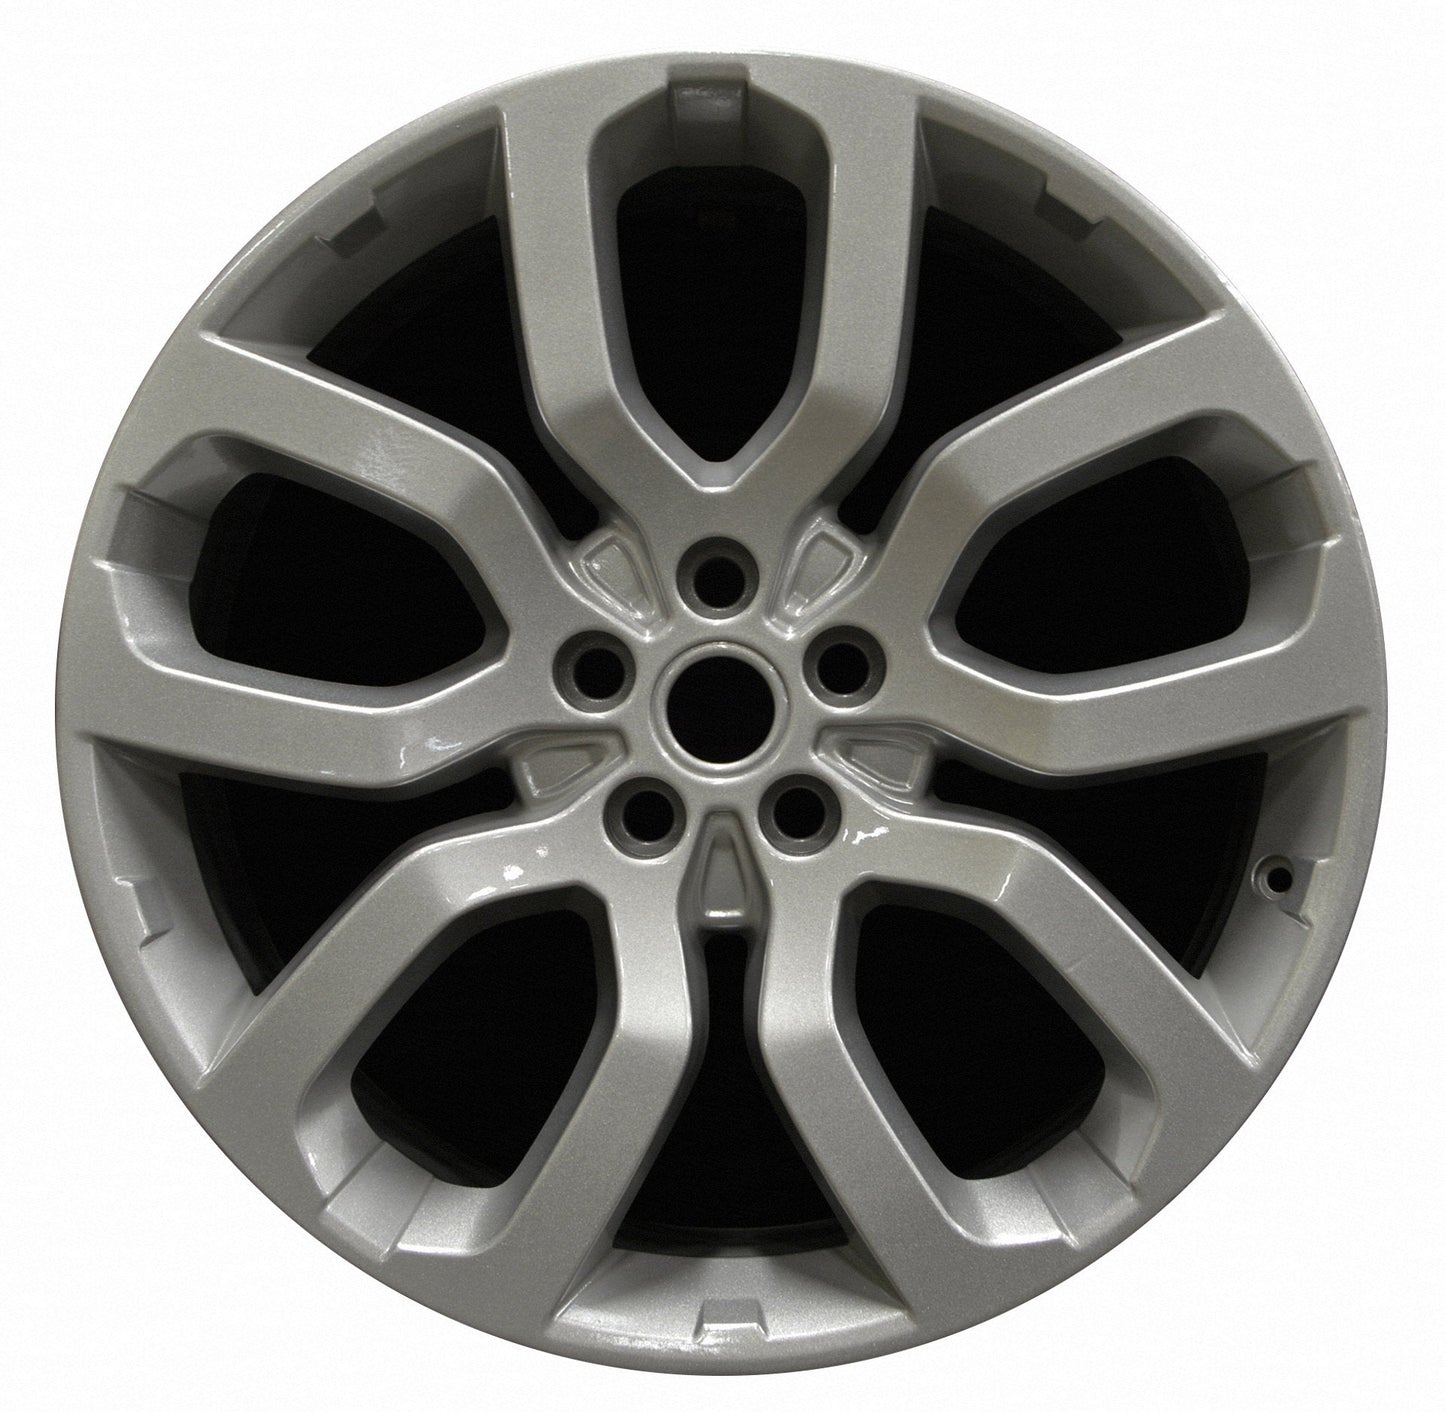 Land Rover Range Rover Sport  2014, 2015, 2016, 2017, 2018 Factory OEM Car Wheel Size 22x9.5 Alloy WAO.72247.PS08.FF